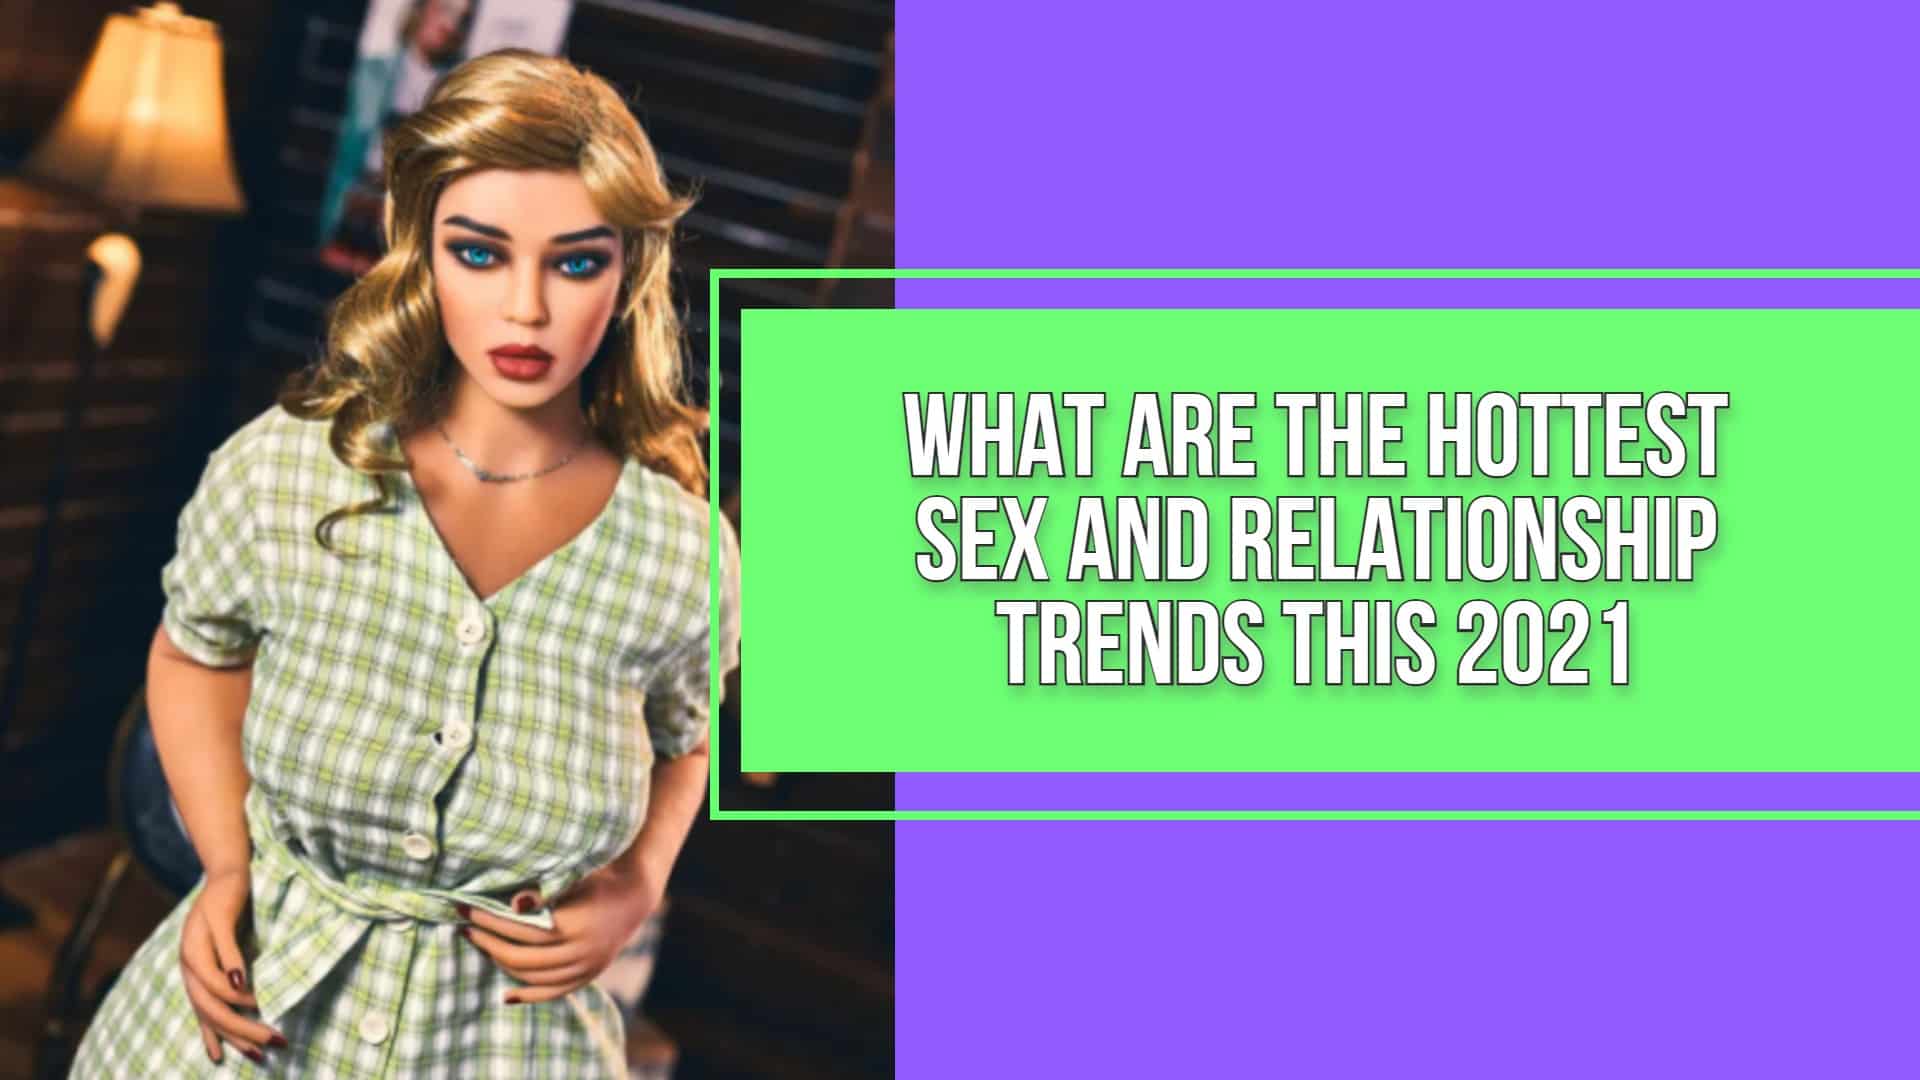 What Are the Hottest Sex and Relationship Trends This 2021